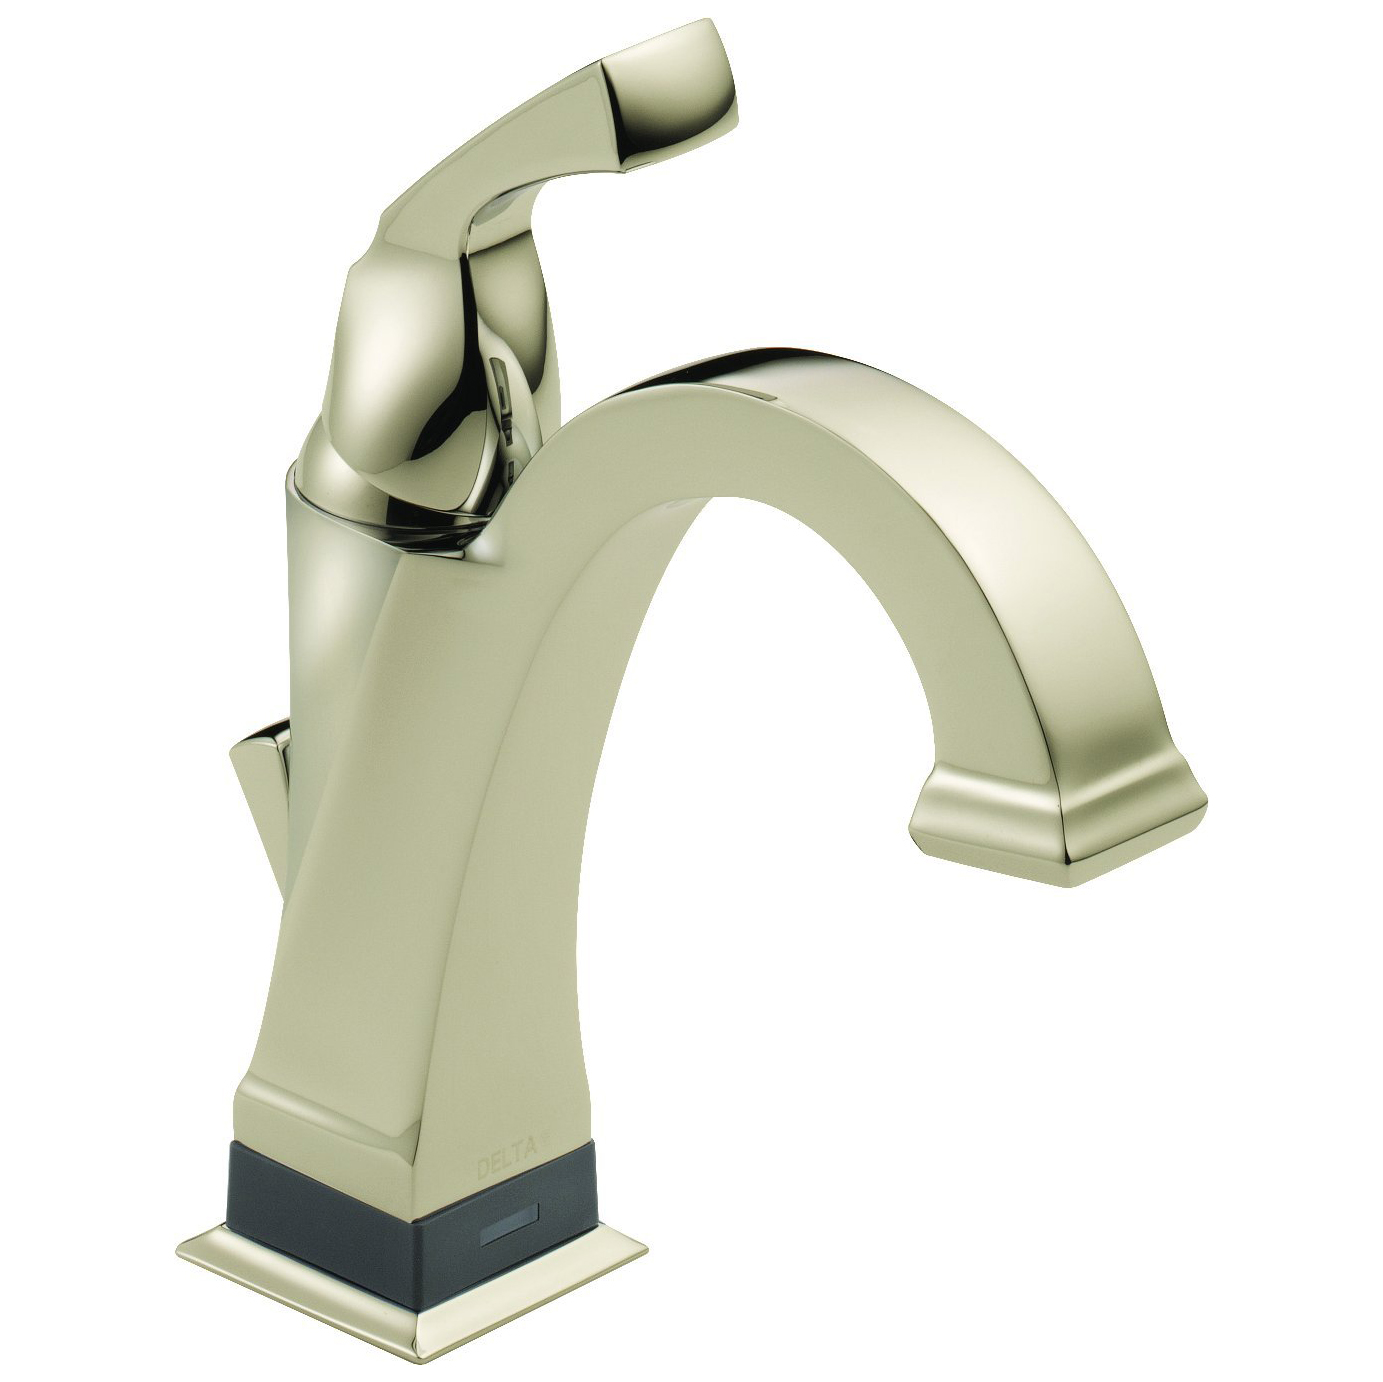 Dryden Touch2O Single Hole Lav Faucet in Polished Nickel